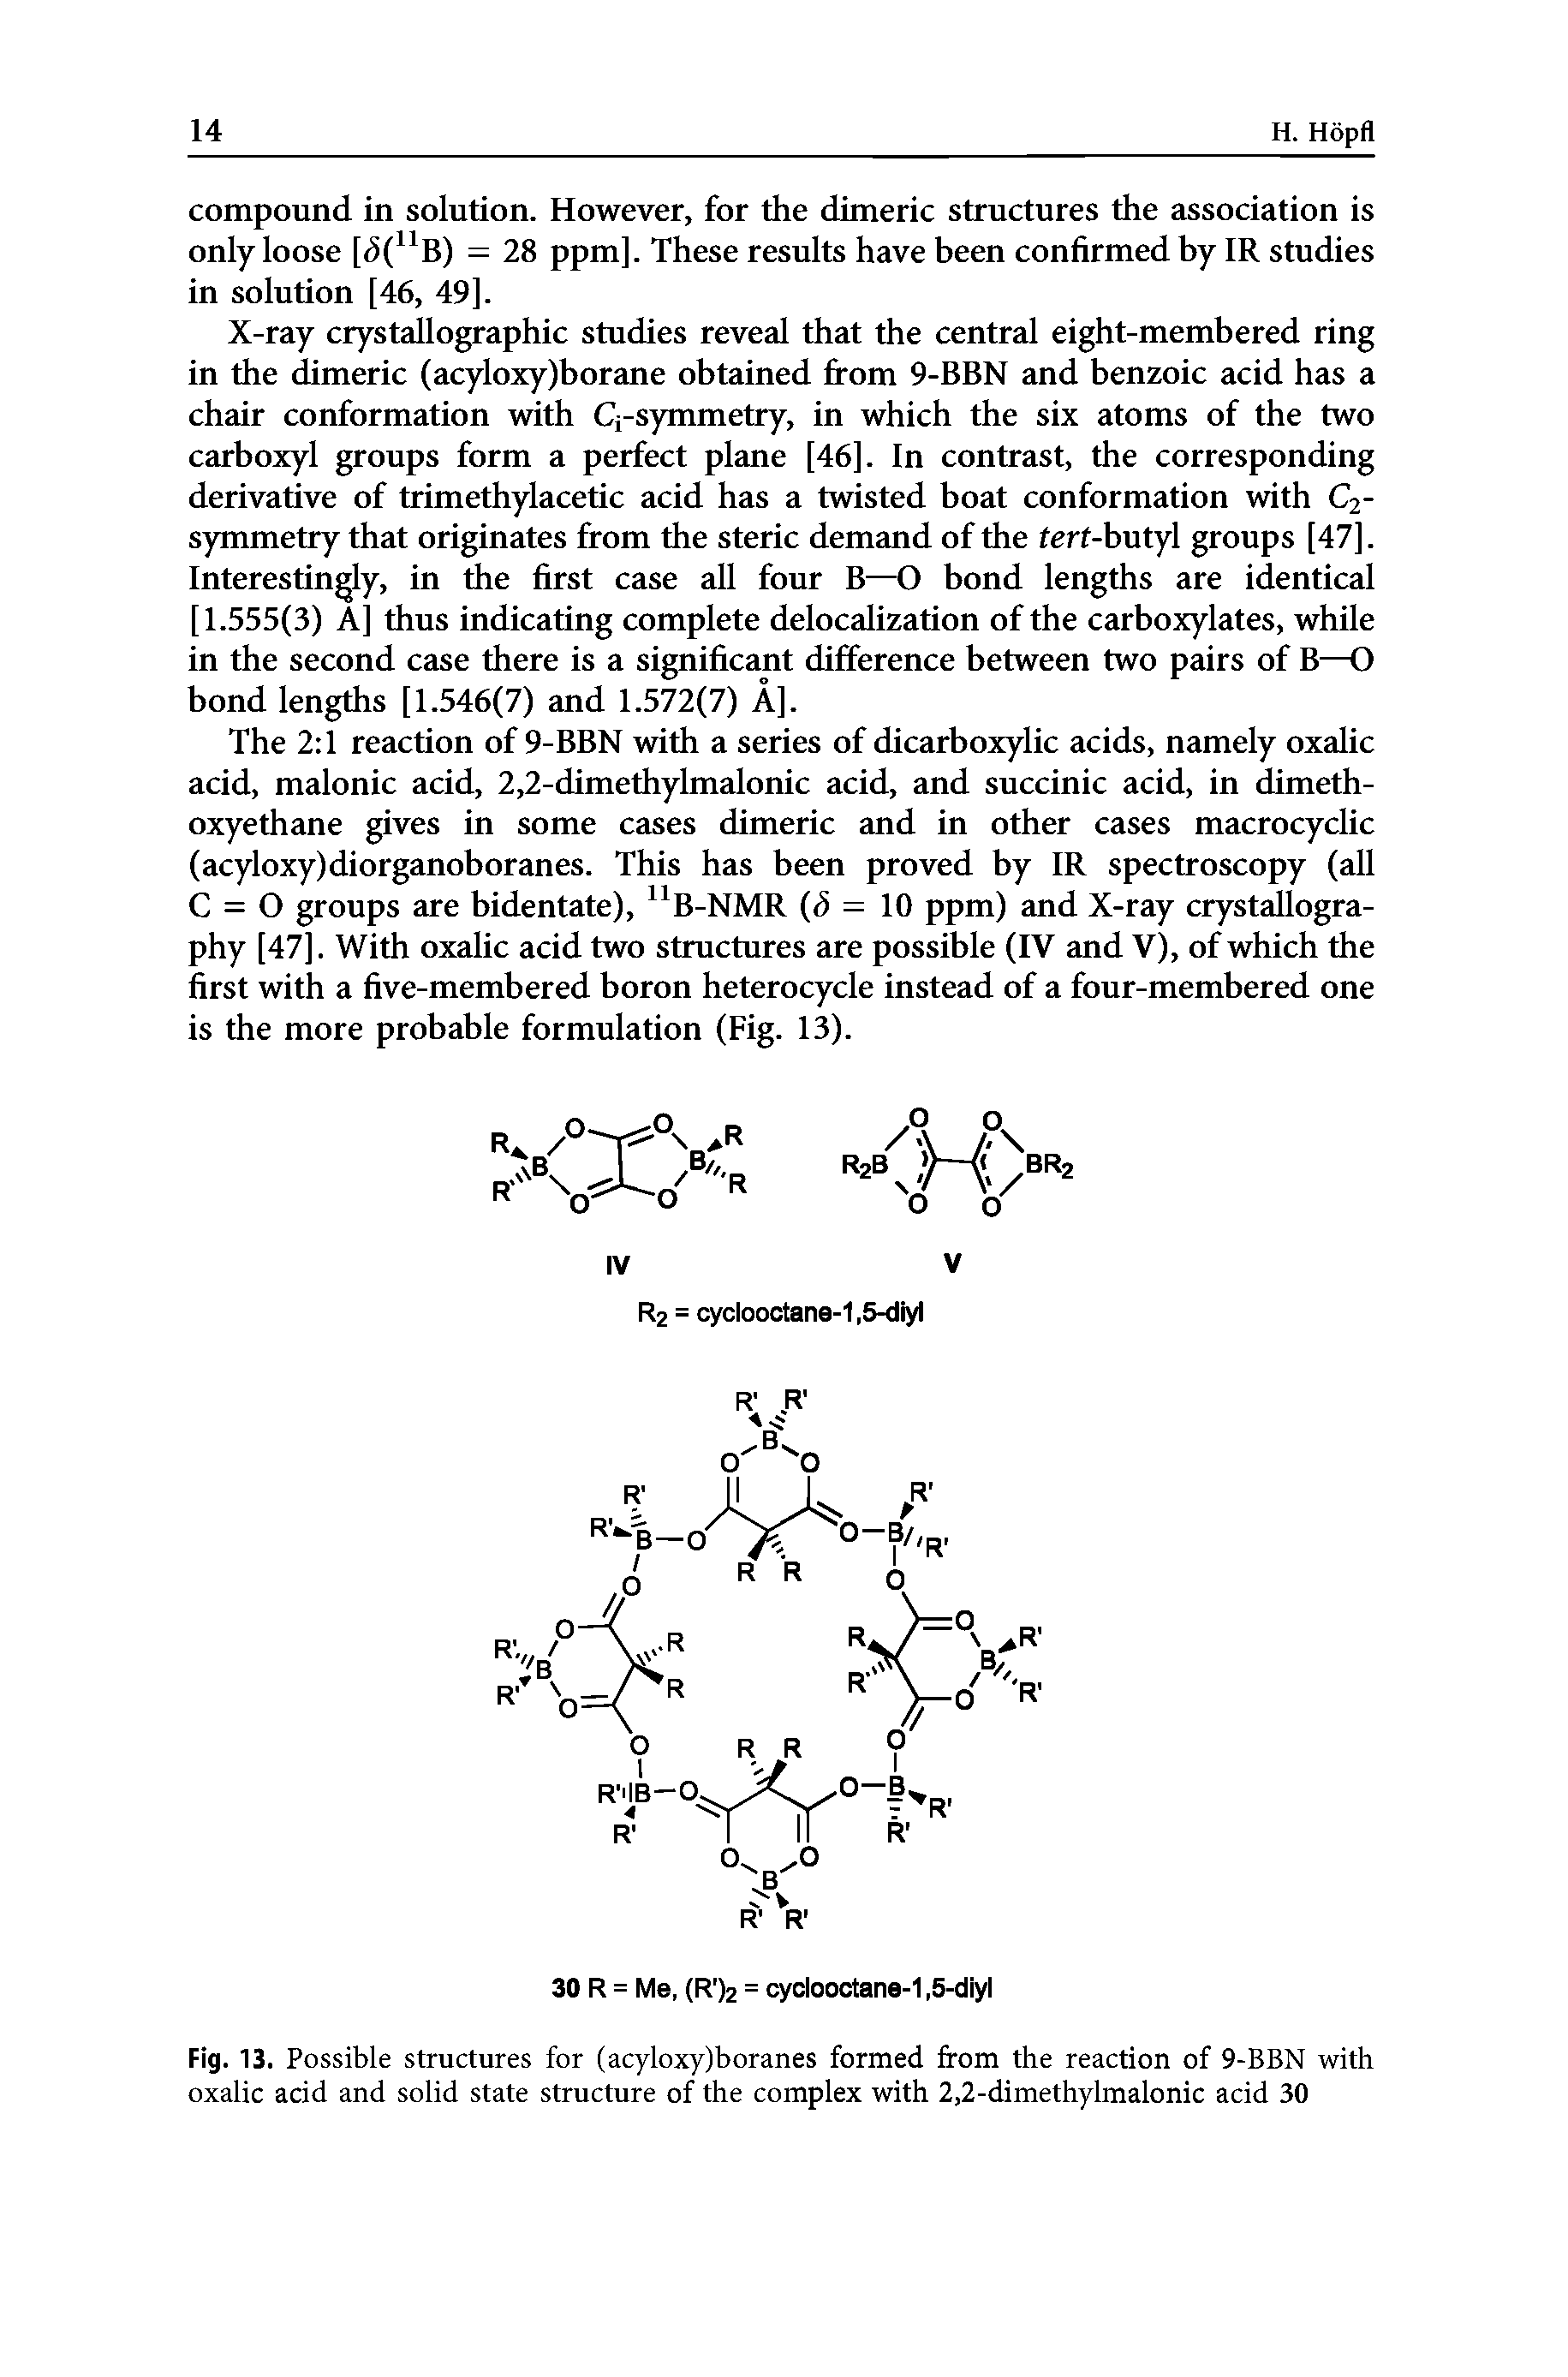 Fig. 13. Possible structures for (acyloxy)boranes formed from the reaction of 9-BBN with oxalic acid and solid state structure of the complex with 2,2-dimethylmalonic acid 30...